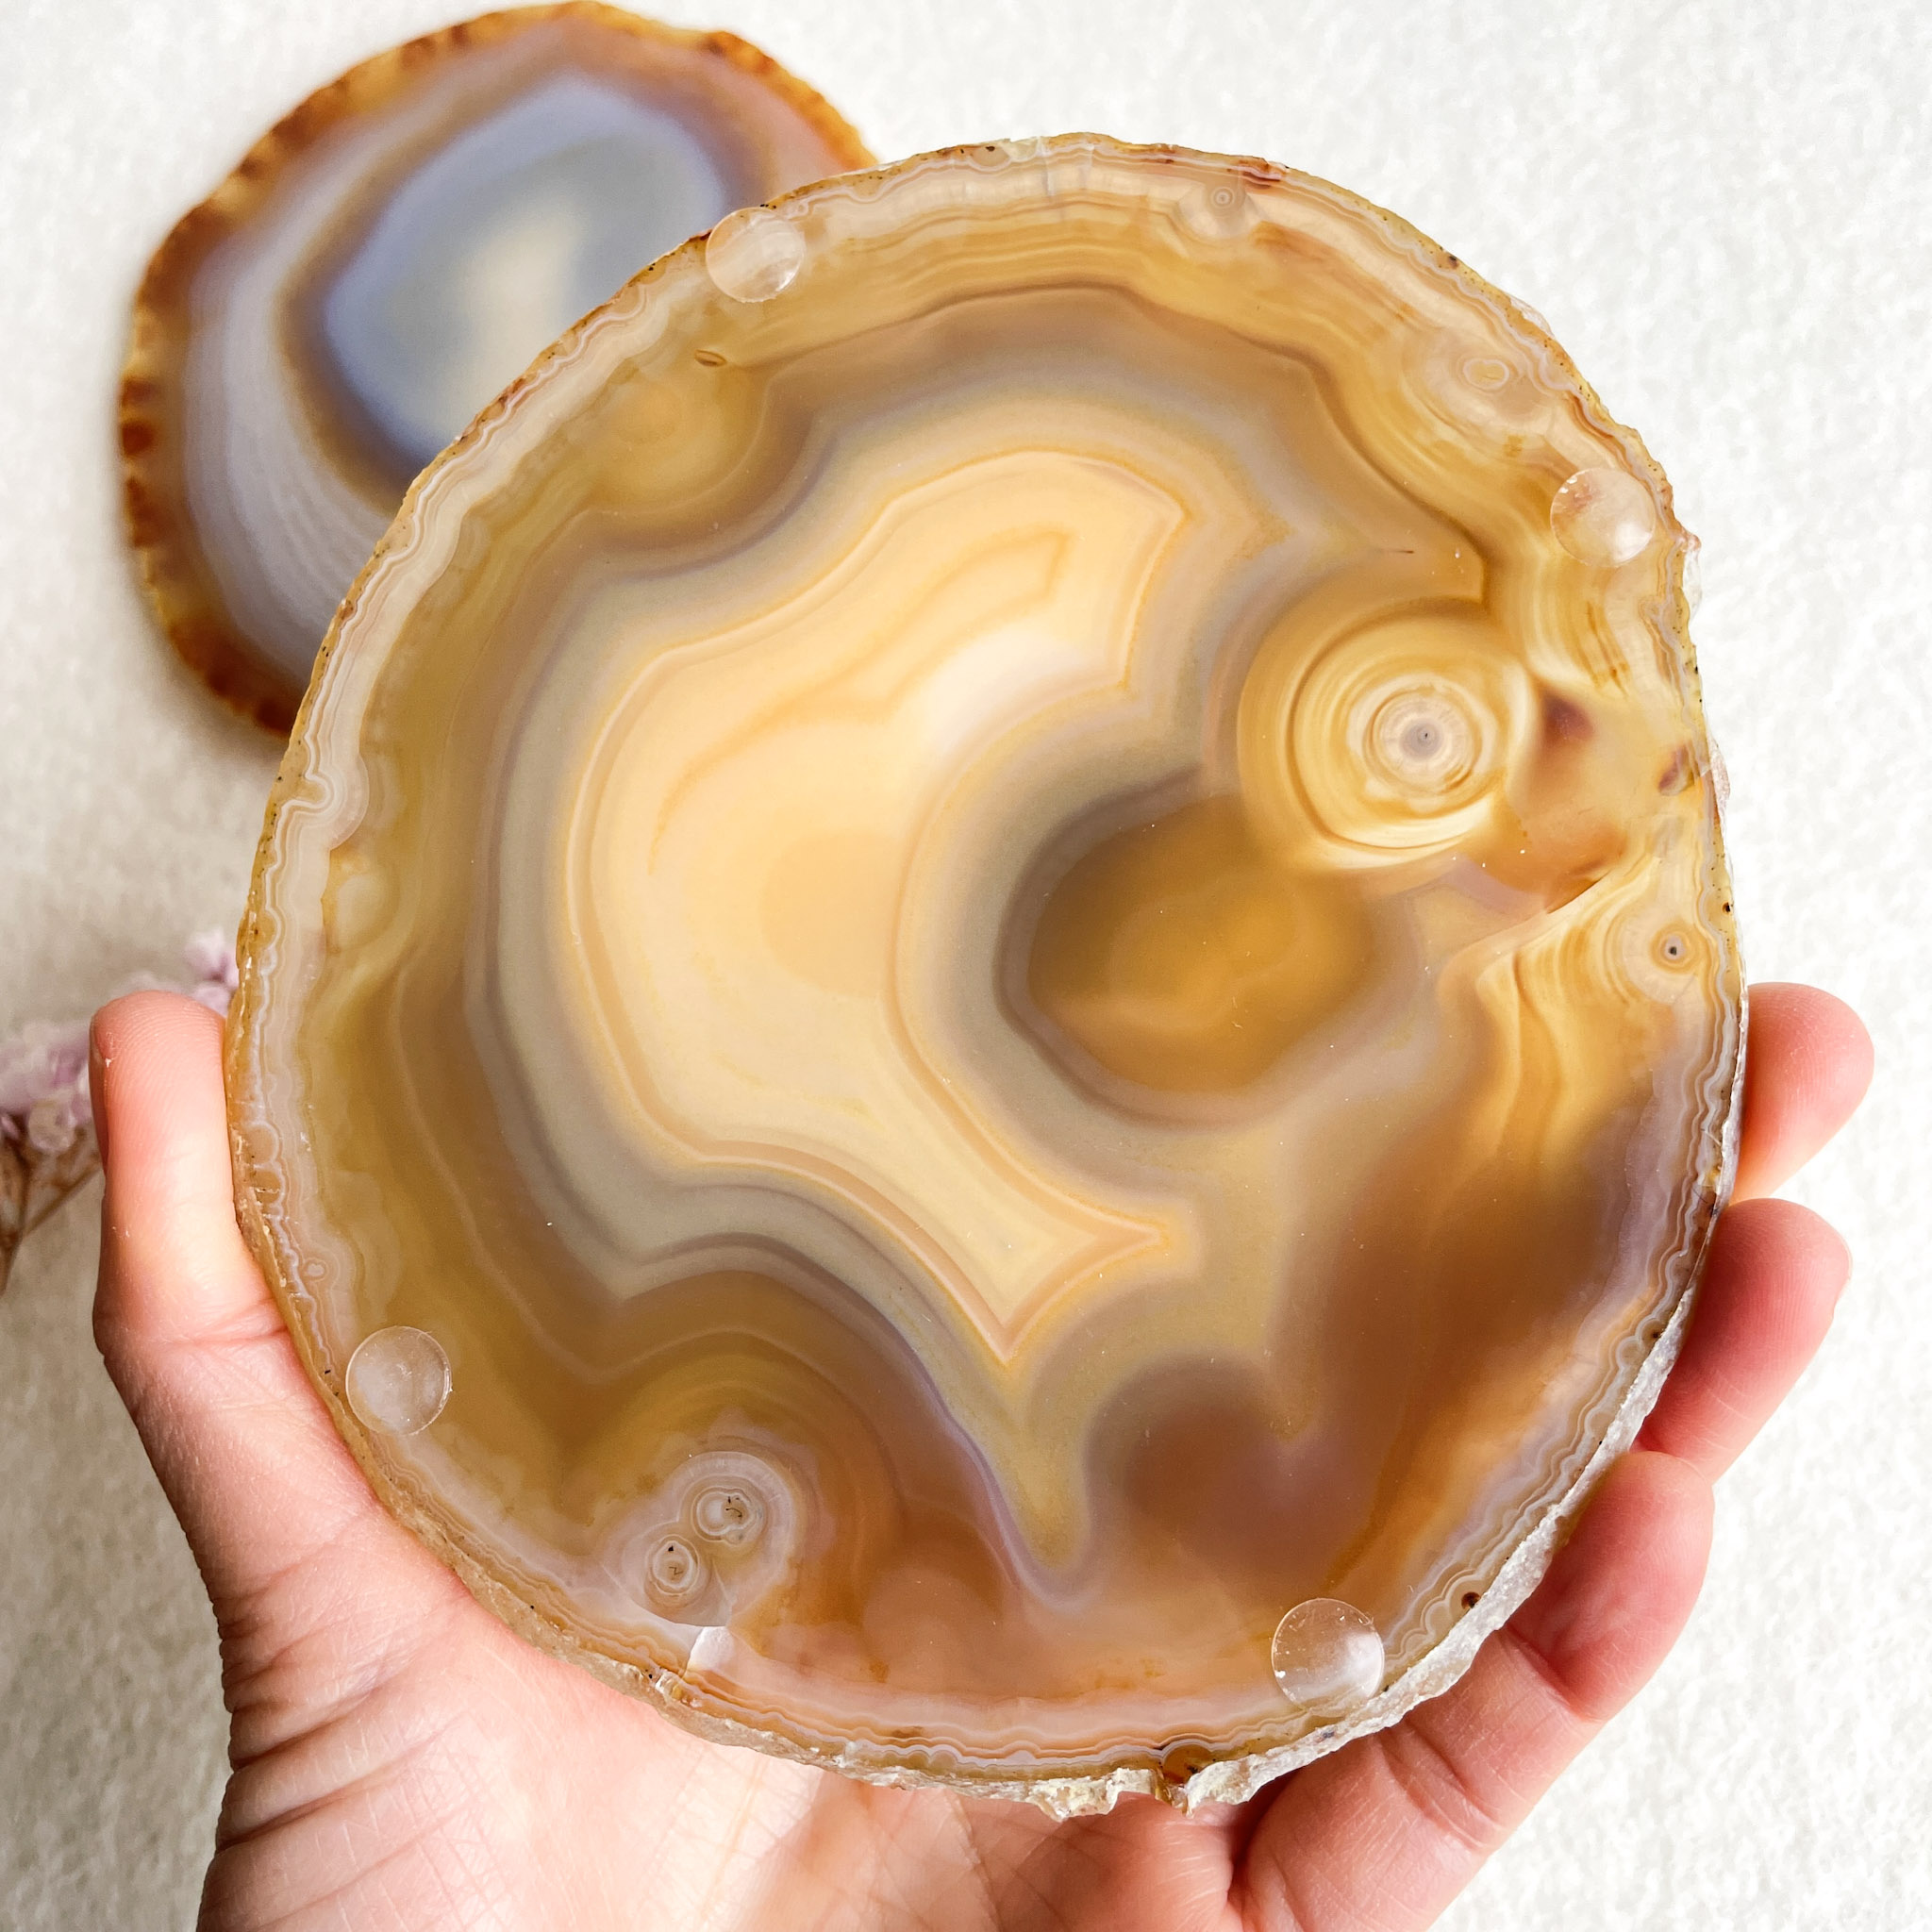 A person holding a polished agate slice, showing concentric bands of tan, cream, and brown colors with natural crystal patterns. Another similar agate slice is partially visible in the background.